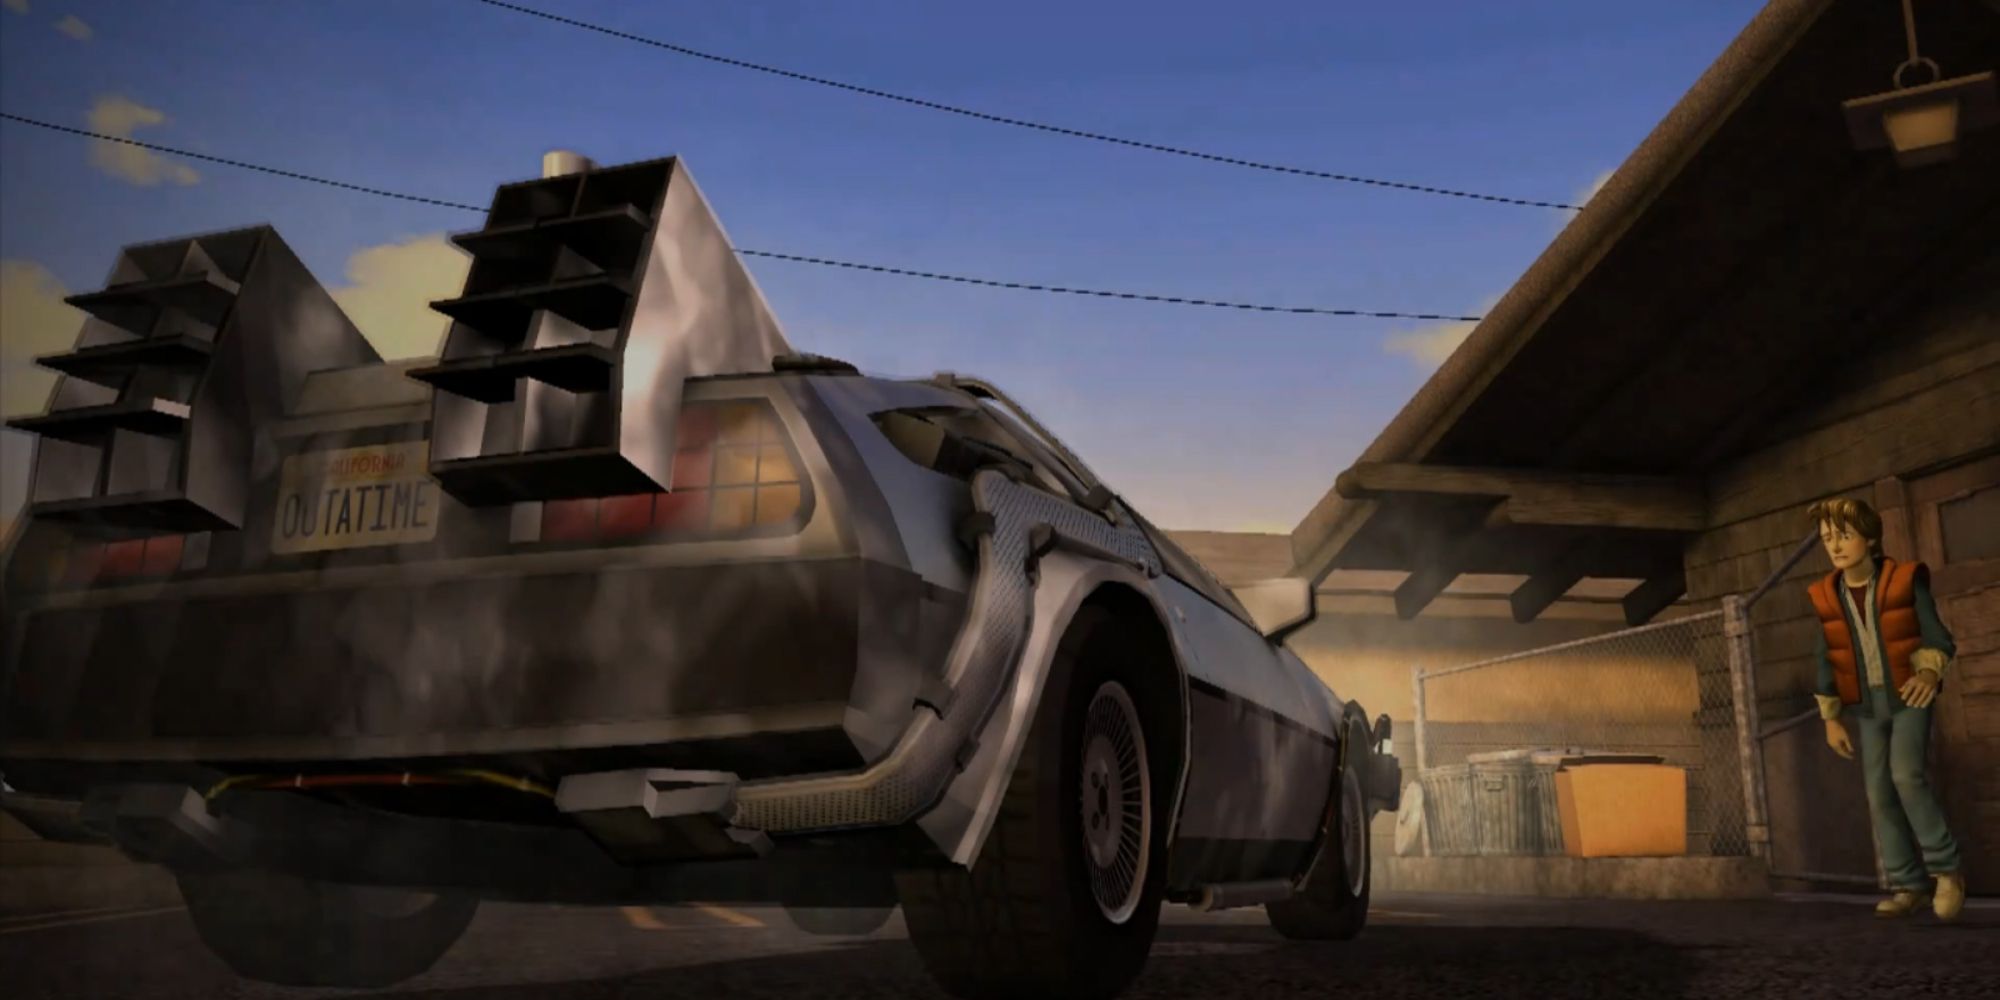 Marty McFly approaching the Delorean in Back To The Future The Game